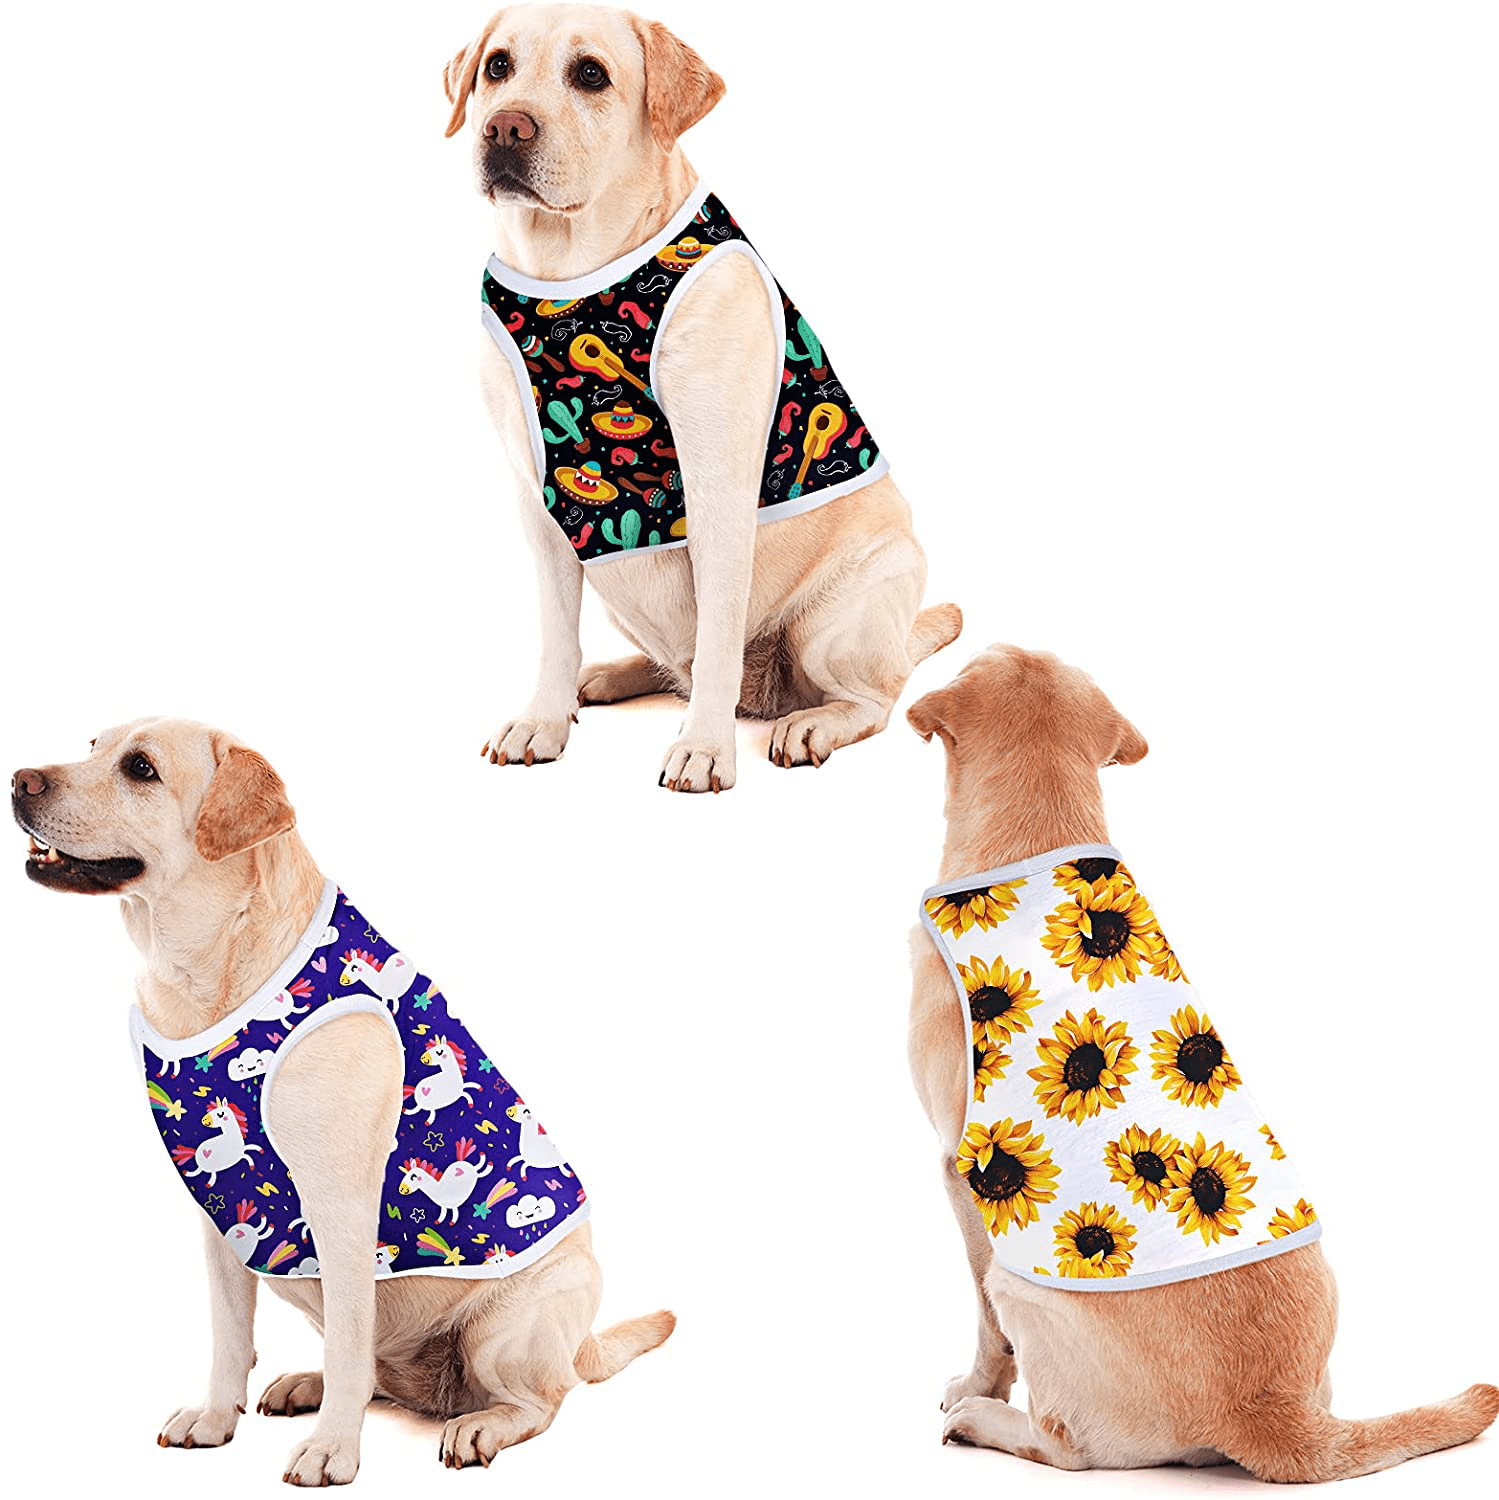 8 Pieces Sublimation Blank Dog Shirt, Heat Transfer Dog Apparel Pajamas, Heat Press Lightweight Puppy Vest, Cool Breathable Dog Clothes for Small Medium Dog Wearing (M) Animals & Pet Supplies > Pet Supplies > Dog Supplies > Dog Apparel Frienda   